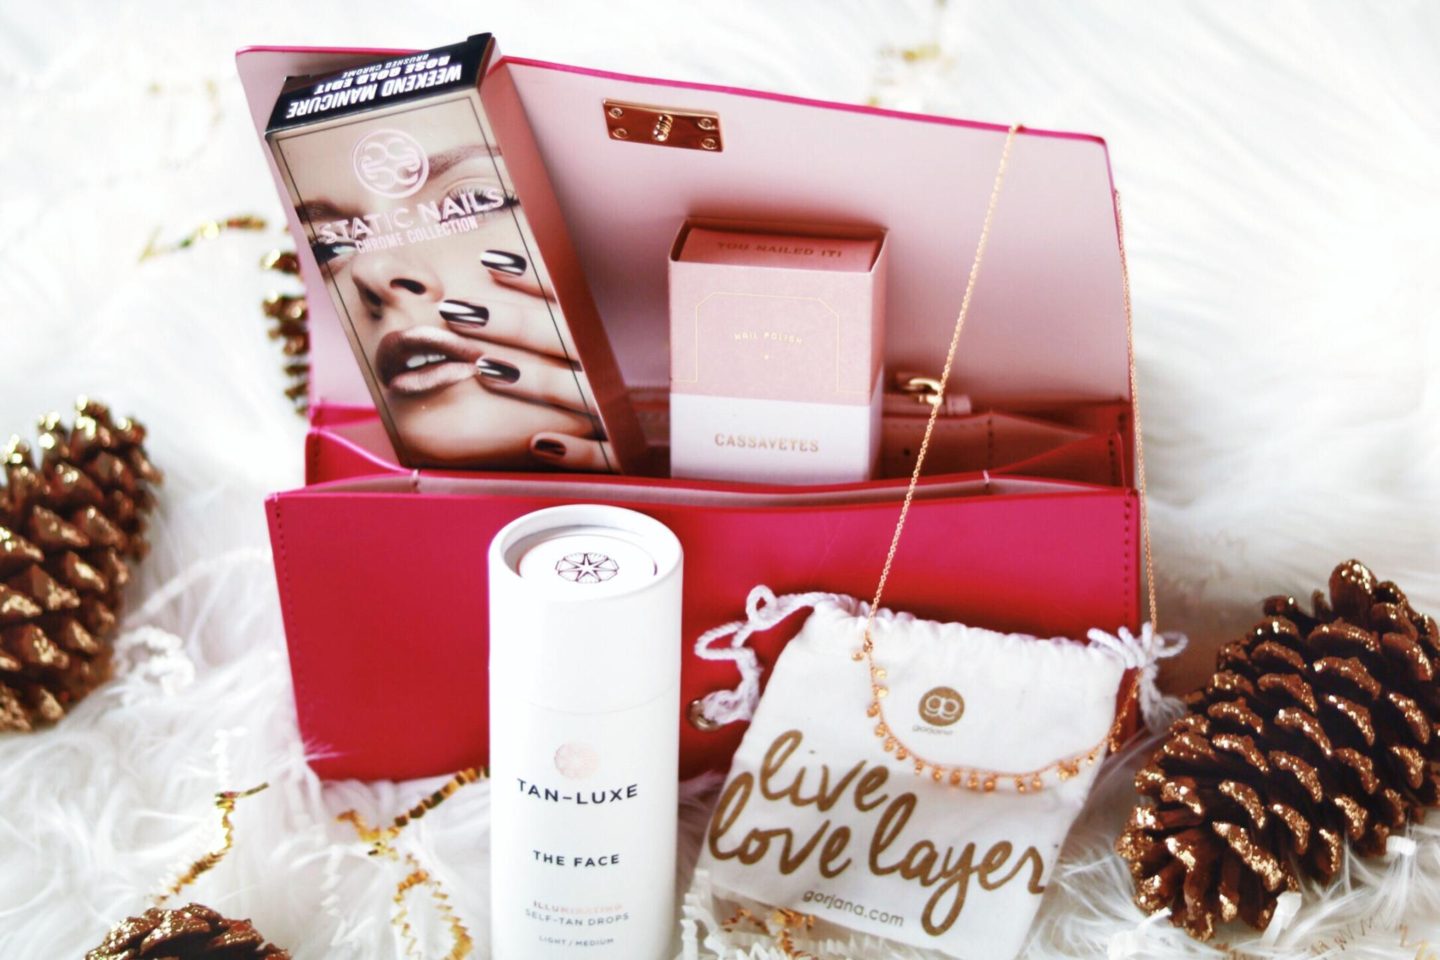 Pink & Gold Giveaway